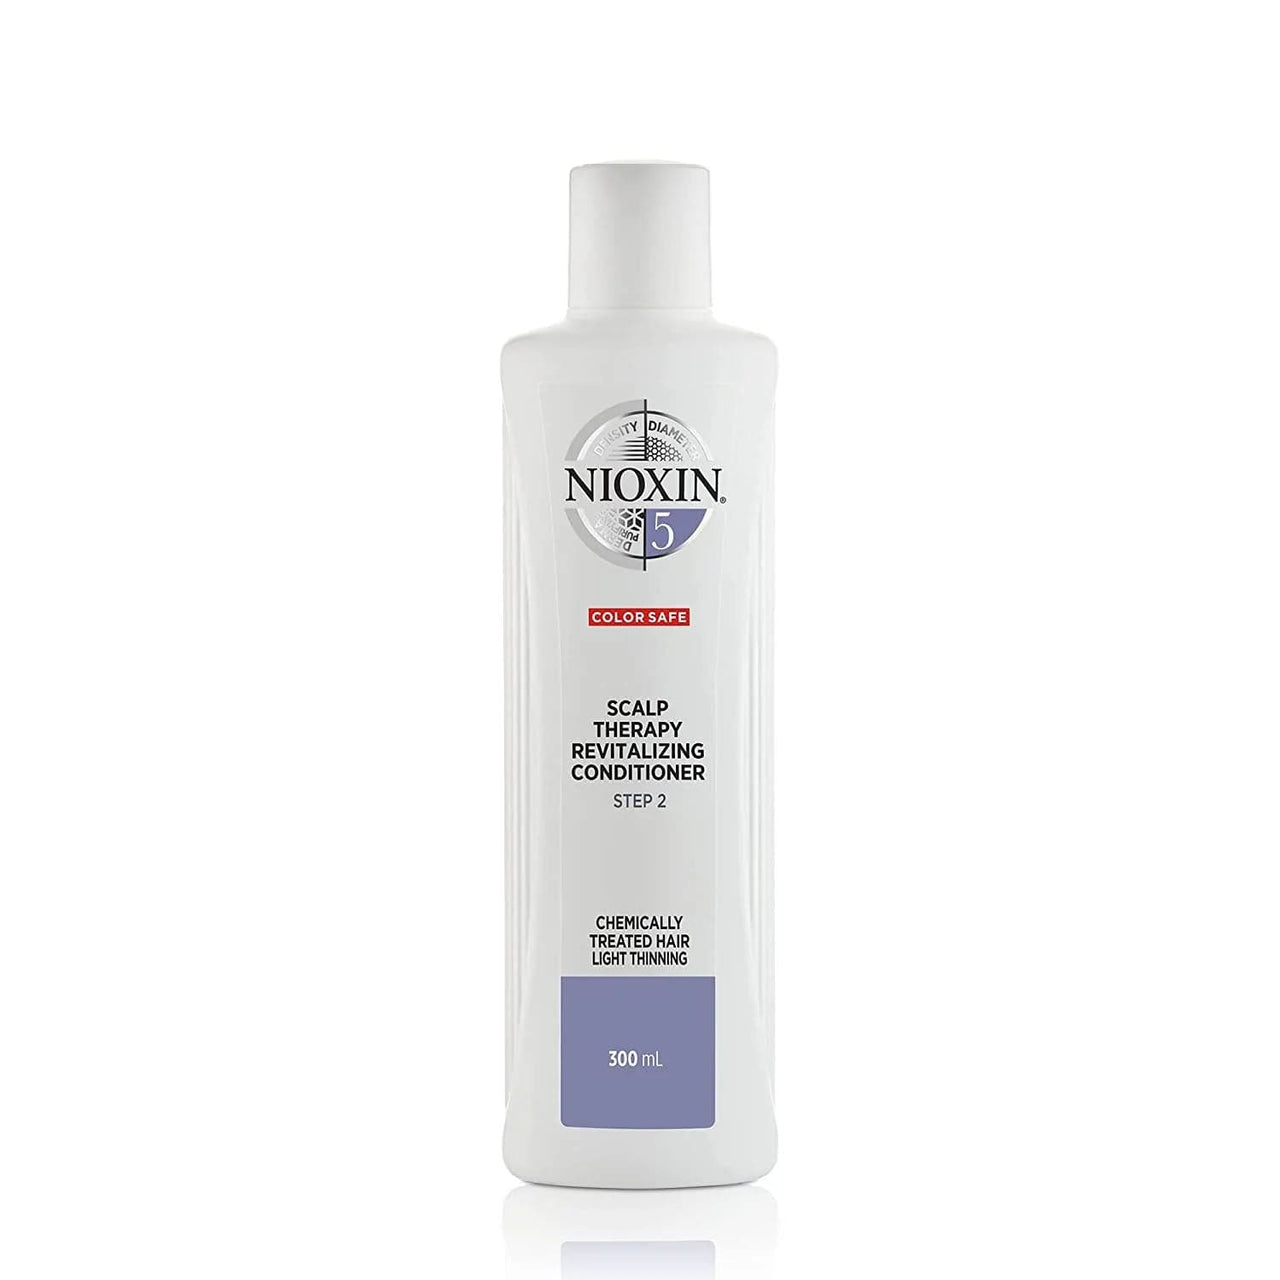 NIOXIN_Scalp Therapy 5 Conditioner Chemically Treated Hair Light Thinning 33.8 oz_Cosmetic World